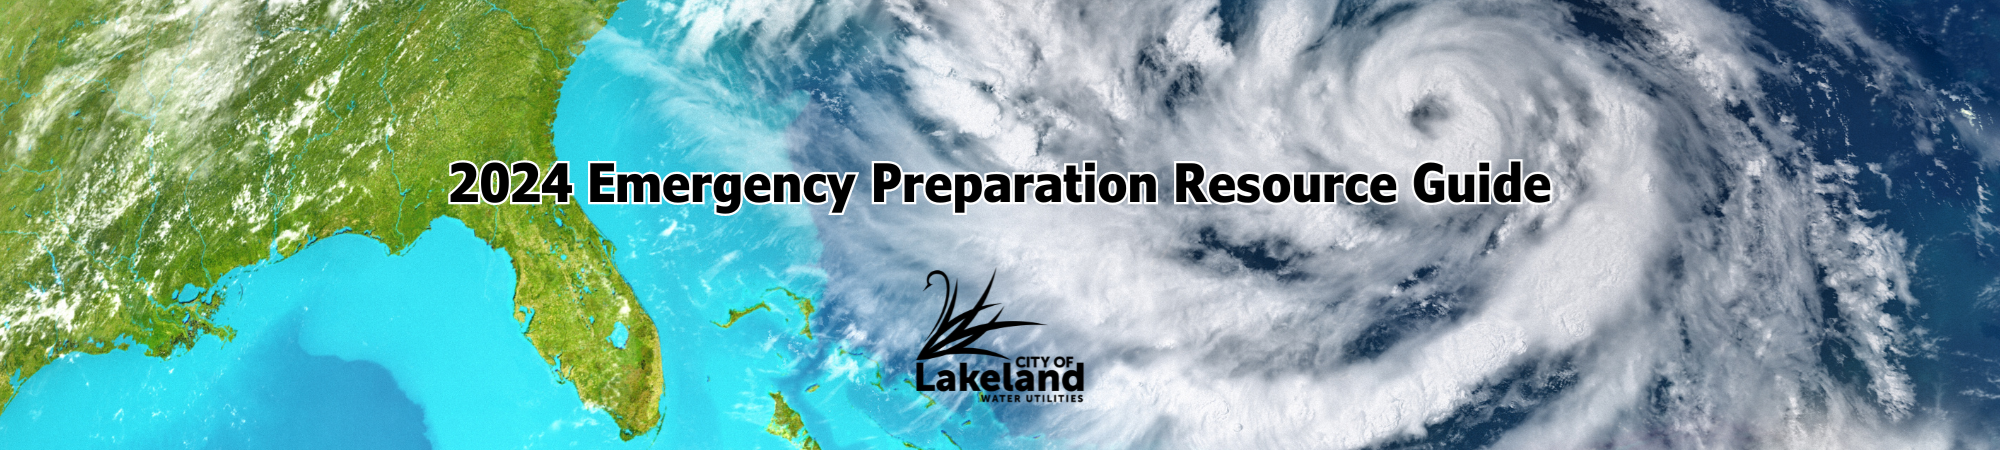 2024 Emergency Preparation Resource Guide Graphic